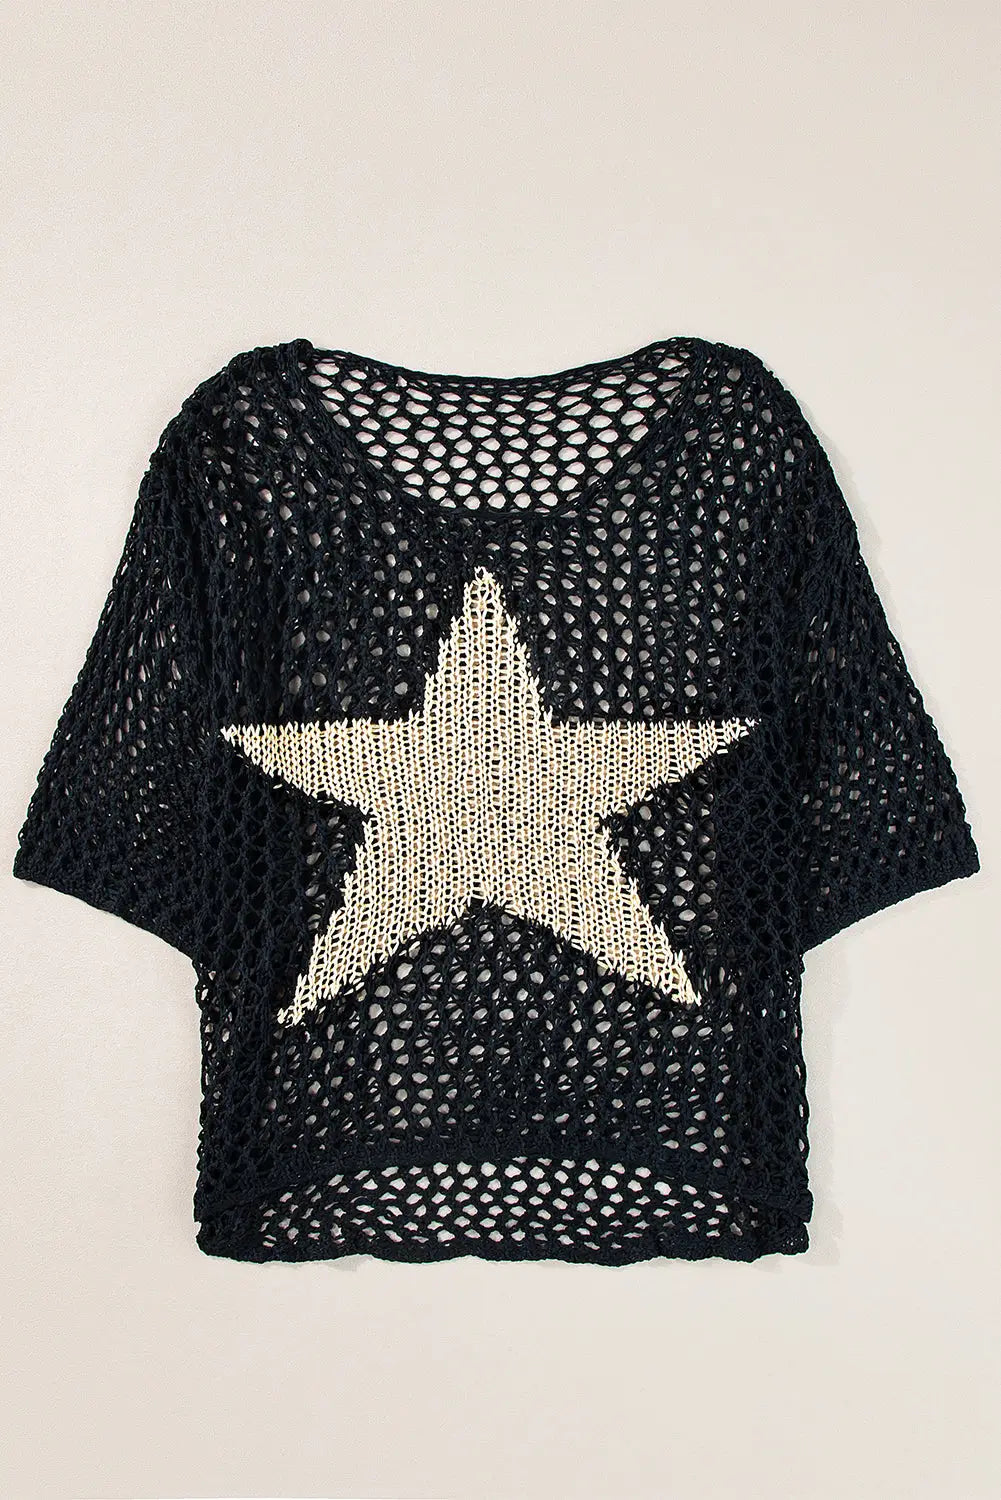 White star graphic crochet summer top - tops/tops & tees